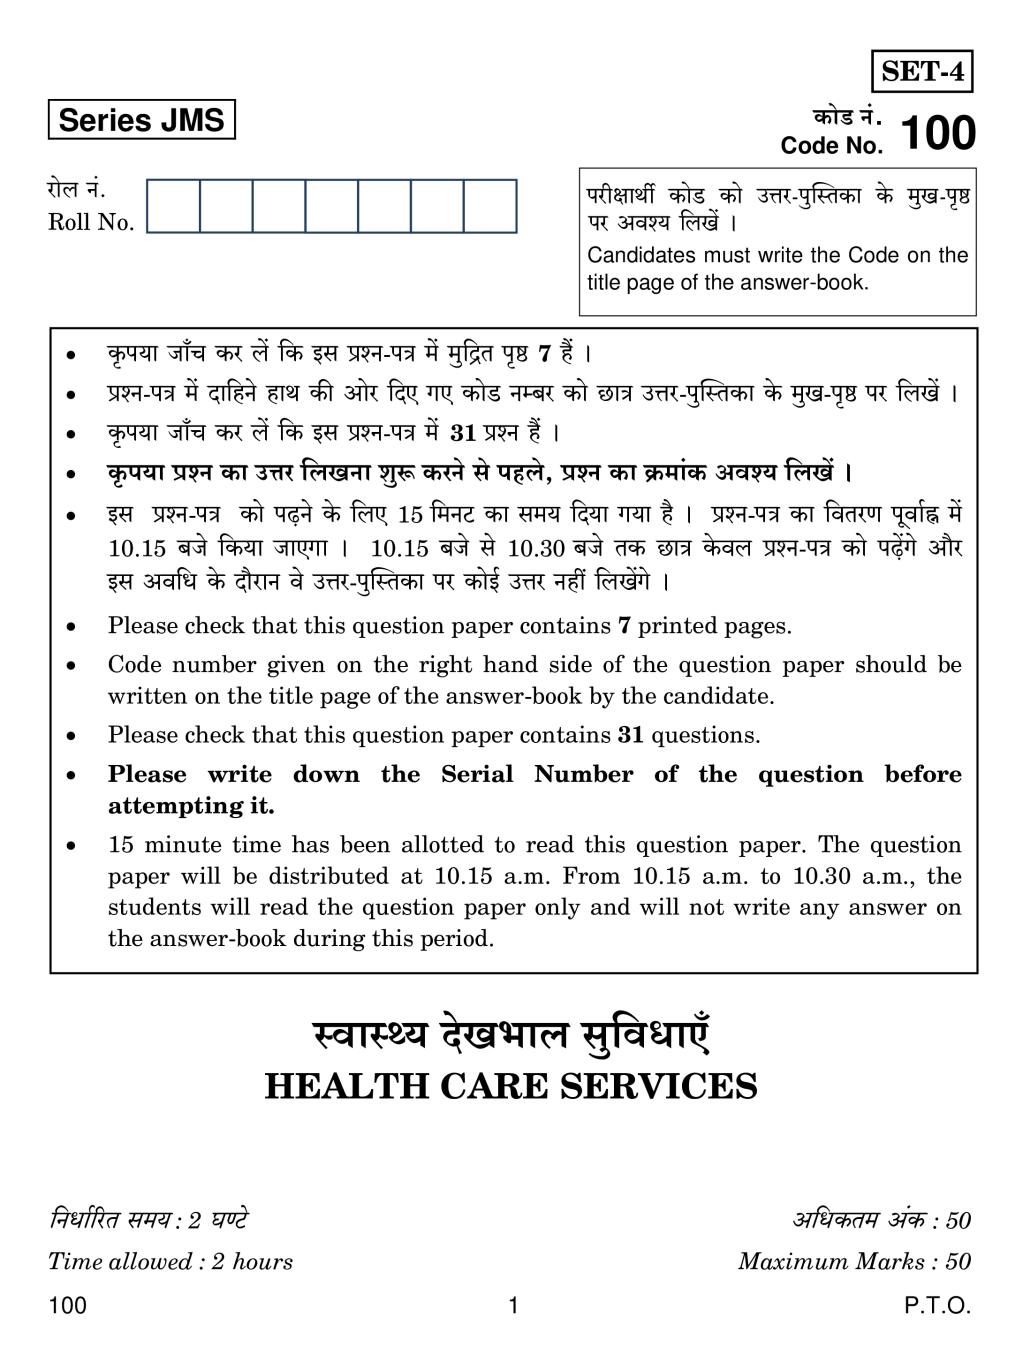 CBSE Class 10 Health Care Services Question Paper 2019 - Page 1